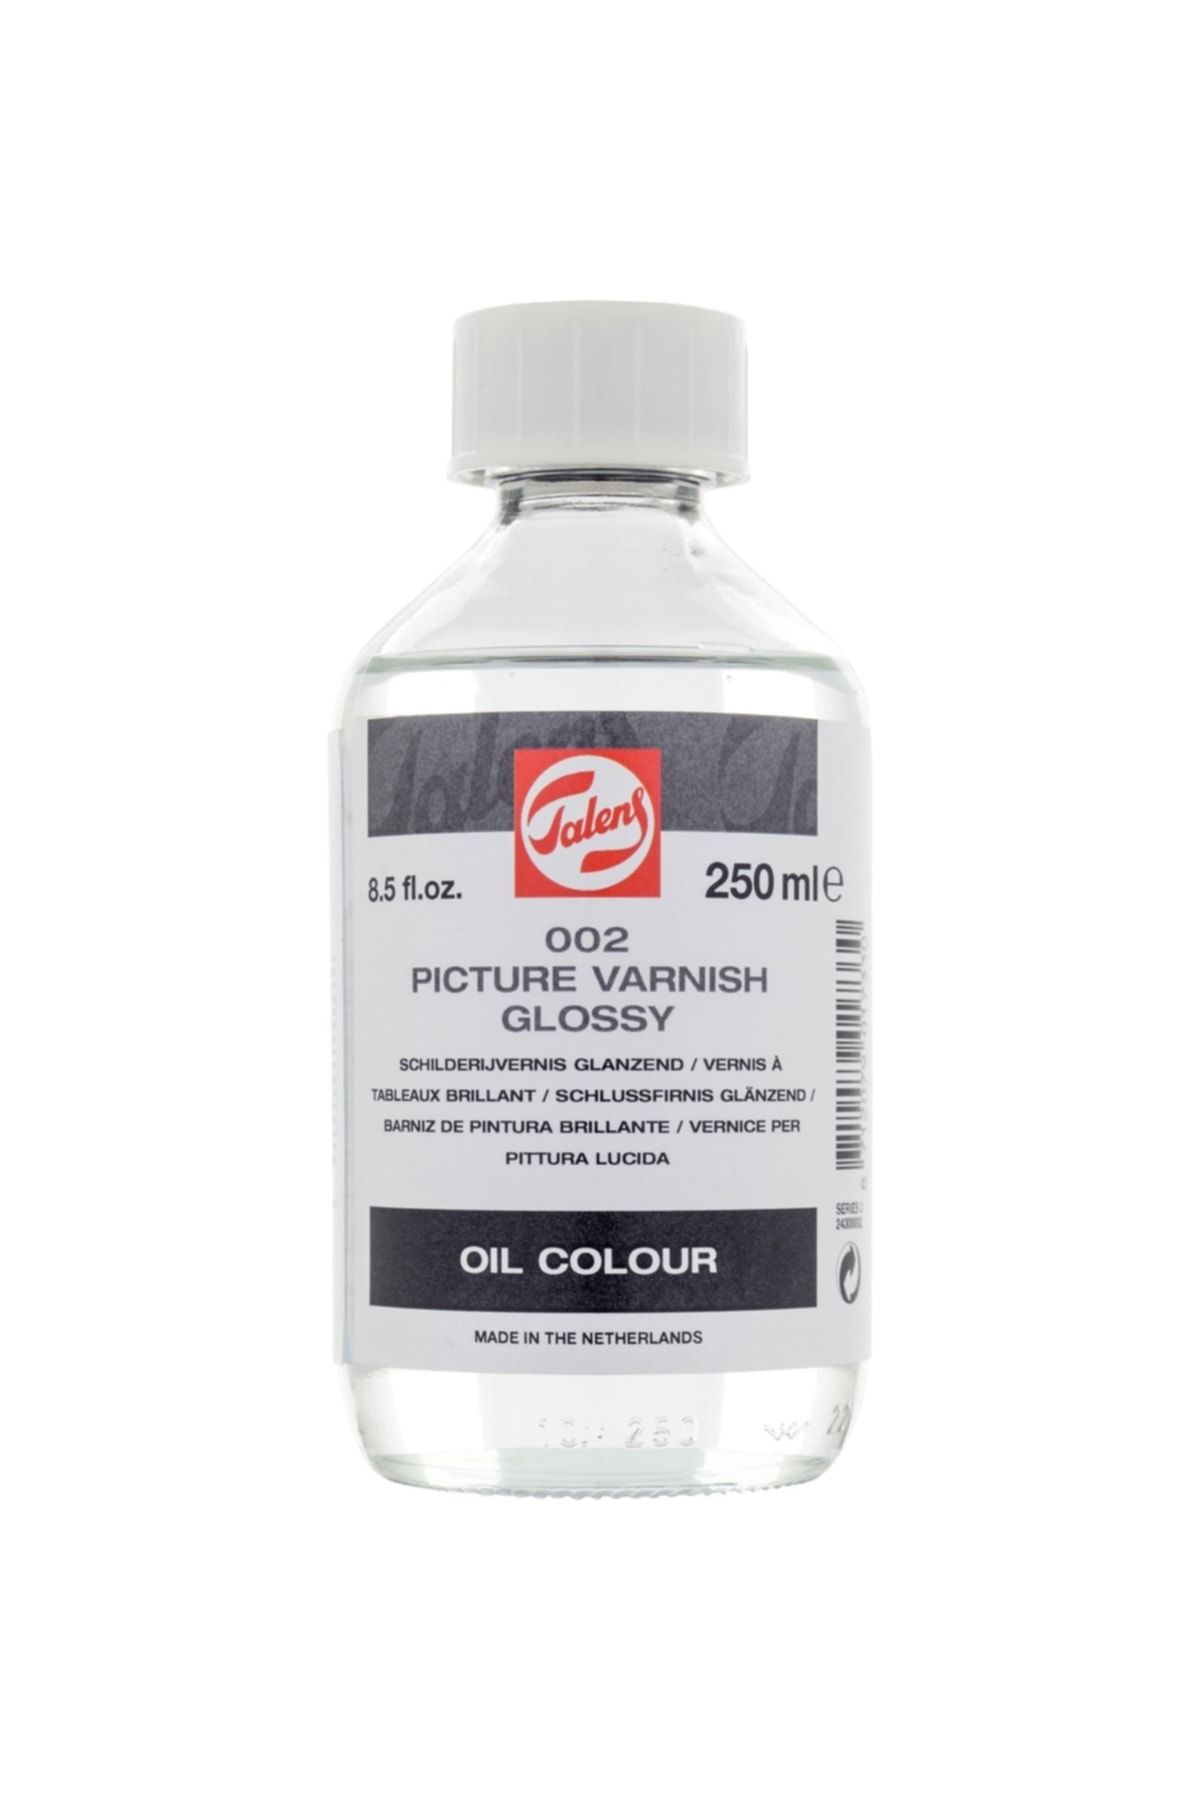 Talens Picture Varnish Glossy 002 250ml